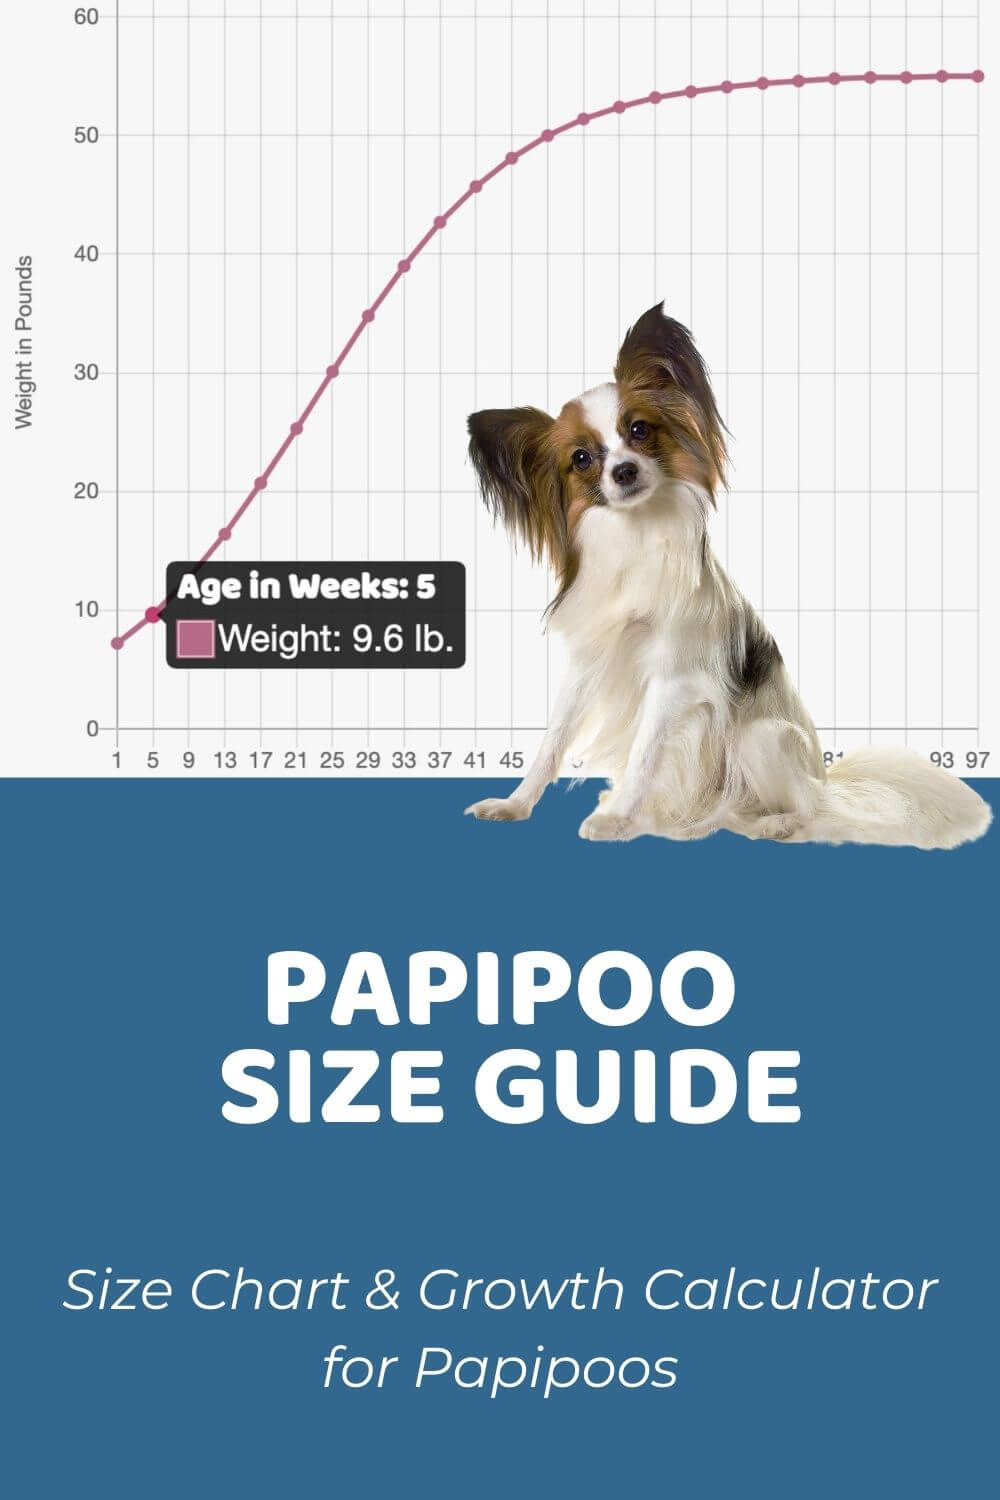 Papipoo Size Chart, Growth Patterns & Growth Calculator